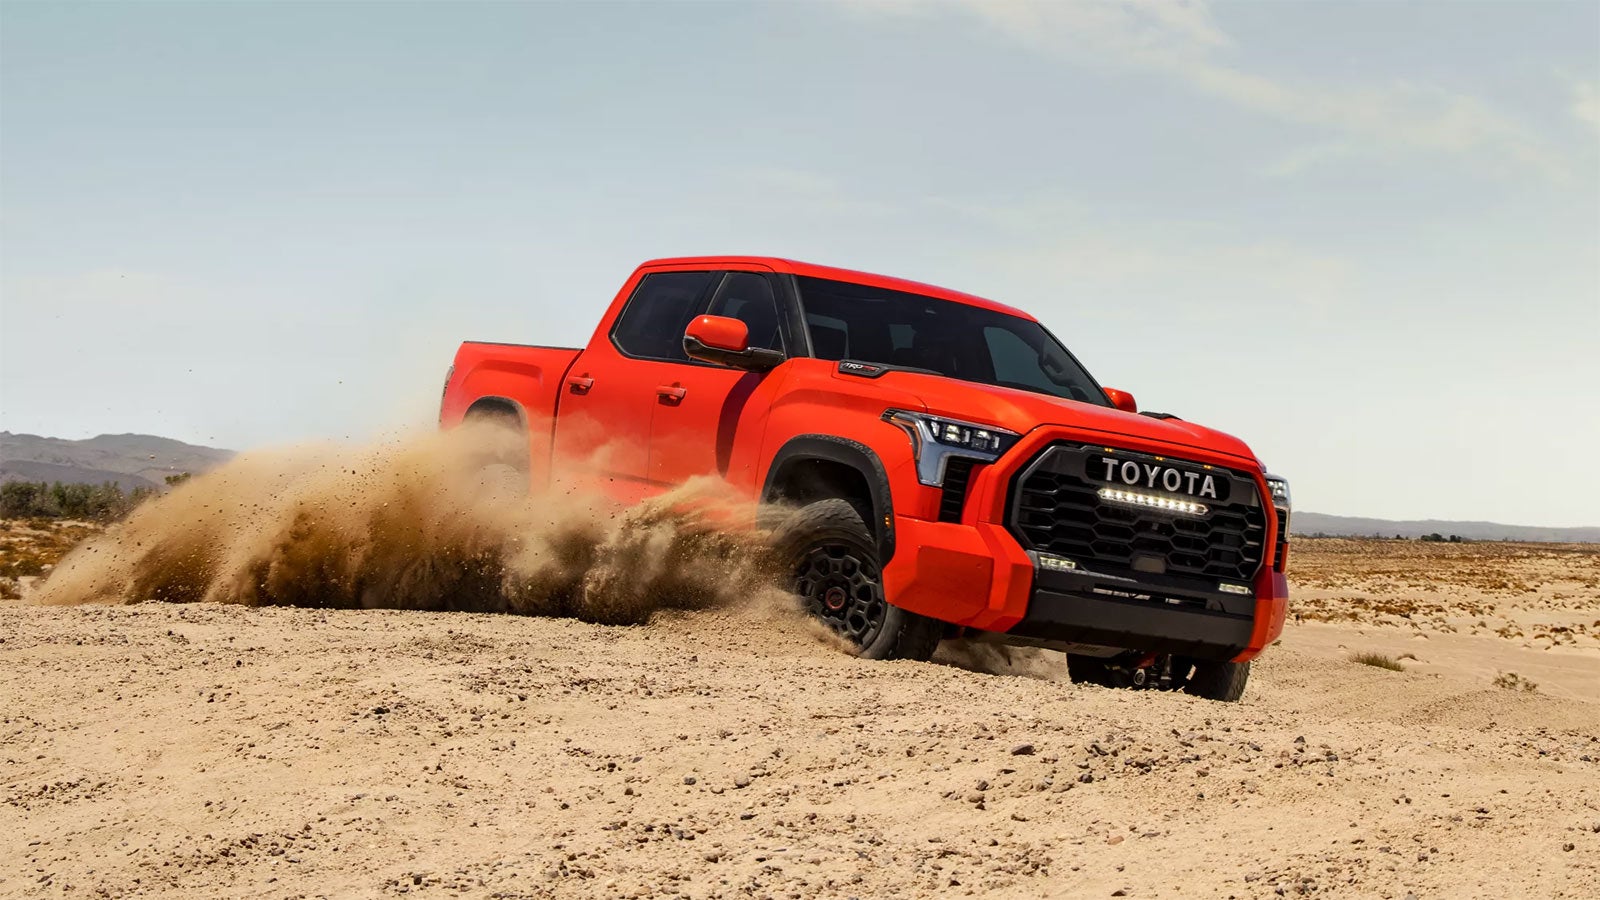 2022 Toyota Tundra Gallery | Toyota South in Richmond KY